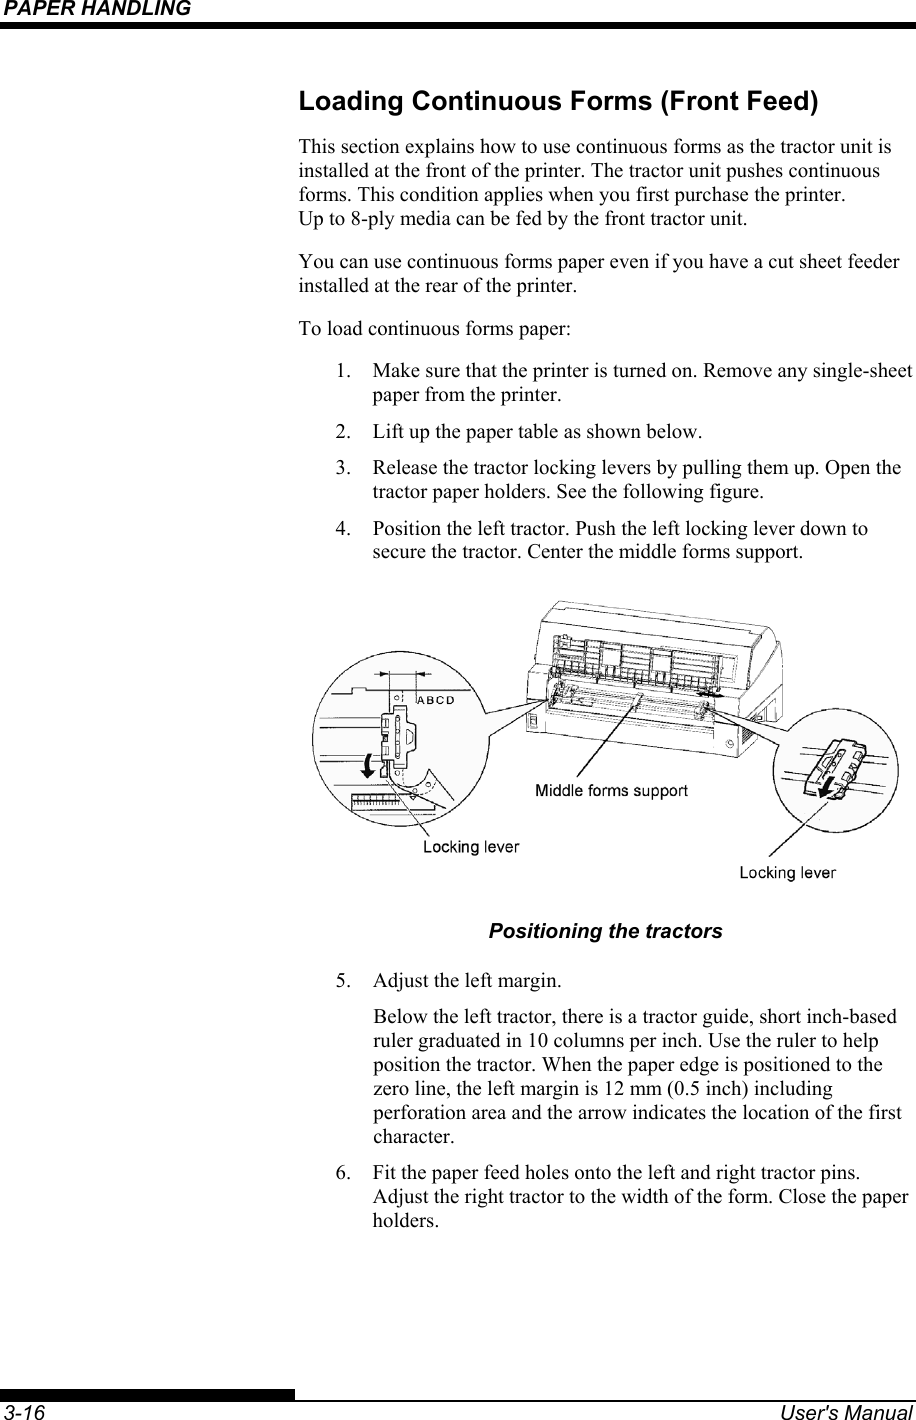 PAPER HANDLING    3-16  User&apos;s Manual Loading Continuous Forms (Front Feed) This section explains how to use continuous forms as the tractor unit is installed at the front of the printer. The tractor unit pushes continuous forms. This condition applies when you first purchase the printer. Up to 8-ply media can be fed by the front tractor unit. You can use continuous forms paper even if you have a cut sheet feeder installed at the rear of the printer. To load continuous forms paper: 1.  Make sure that the printer is turned on. Remove any single-sheet paper from the printer. 2.  Lift up the paper table as shown below. 3.  Release the tractor locking levers by pulling them up. Open the tractor paper holders. See the following figure. 4.  Position the left tractor. Push the left locking lever down to secure the tractor. Center the middle forms support.  Positioning the tractors 5.  Adjust the left margin. Below the left tractor, there is a tractor guide, short inch-based ruler graduated in 10 columns per inch. Use the ruler to help position the tractor. When the paper edge is positioned to the zero line, the left margin is 12 mm (0.5 inch) including perforation area and the arrow indicates the location of the first character. 6.  Fit the paper feed holes onto the left and right tractor pins.  Adjust the right tractor to the width of the form. Close the paper holders. 